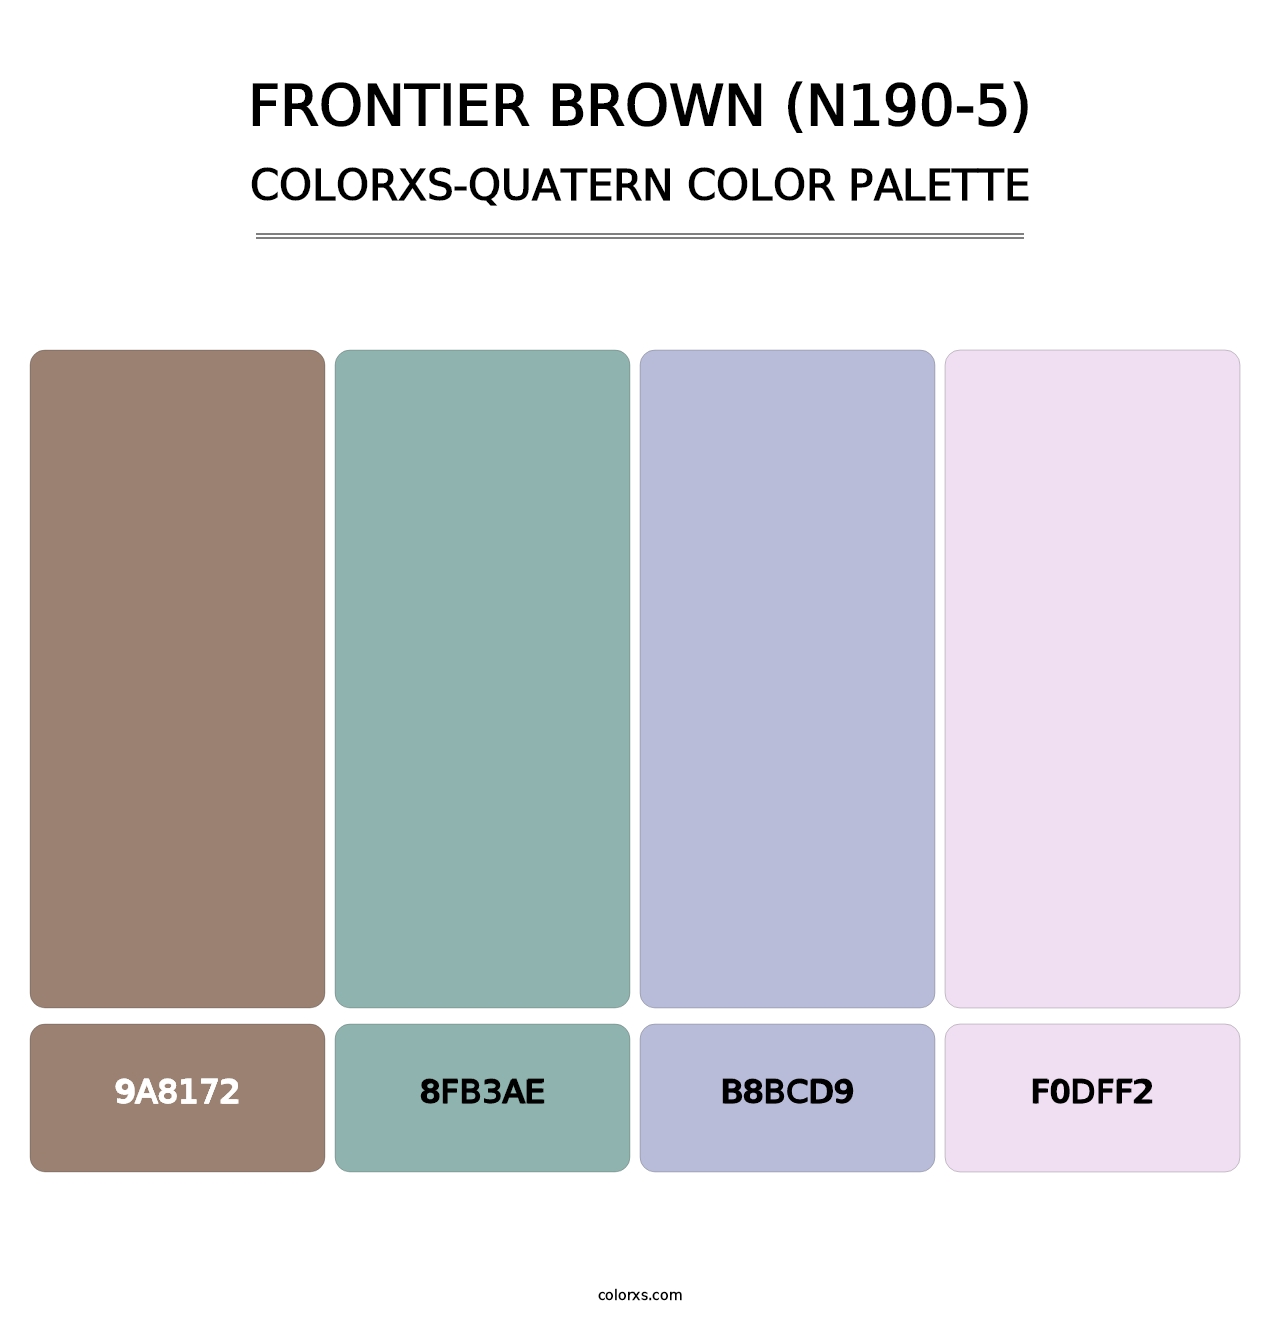 Frontier Brown (N190-5) - Colorxs Quatern Palette